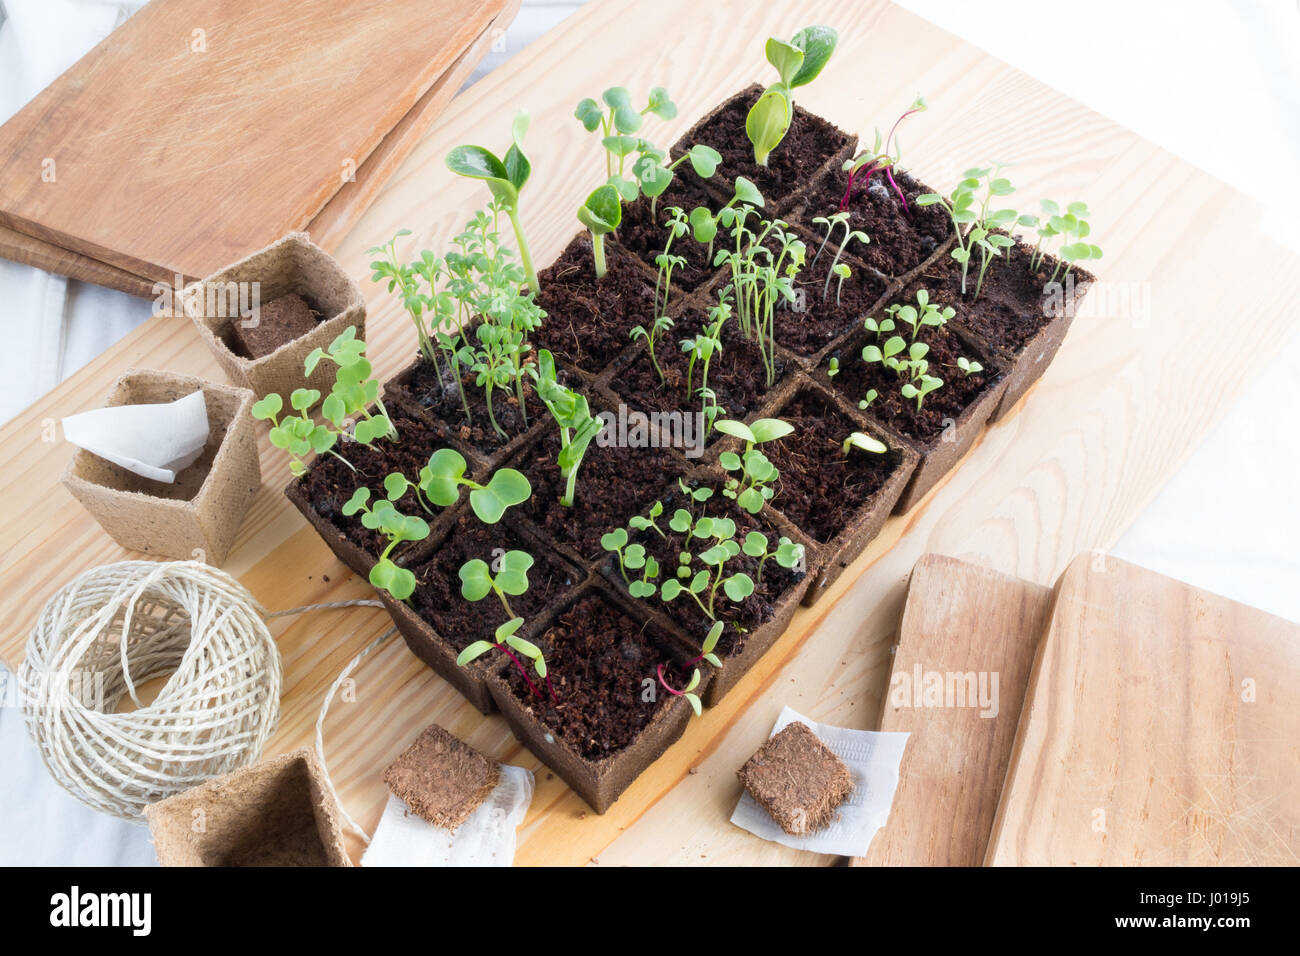 Rows of young fresh seedlings of various herbs and vegetables in peat pots Stock Photo